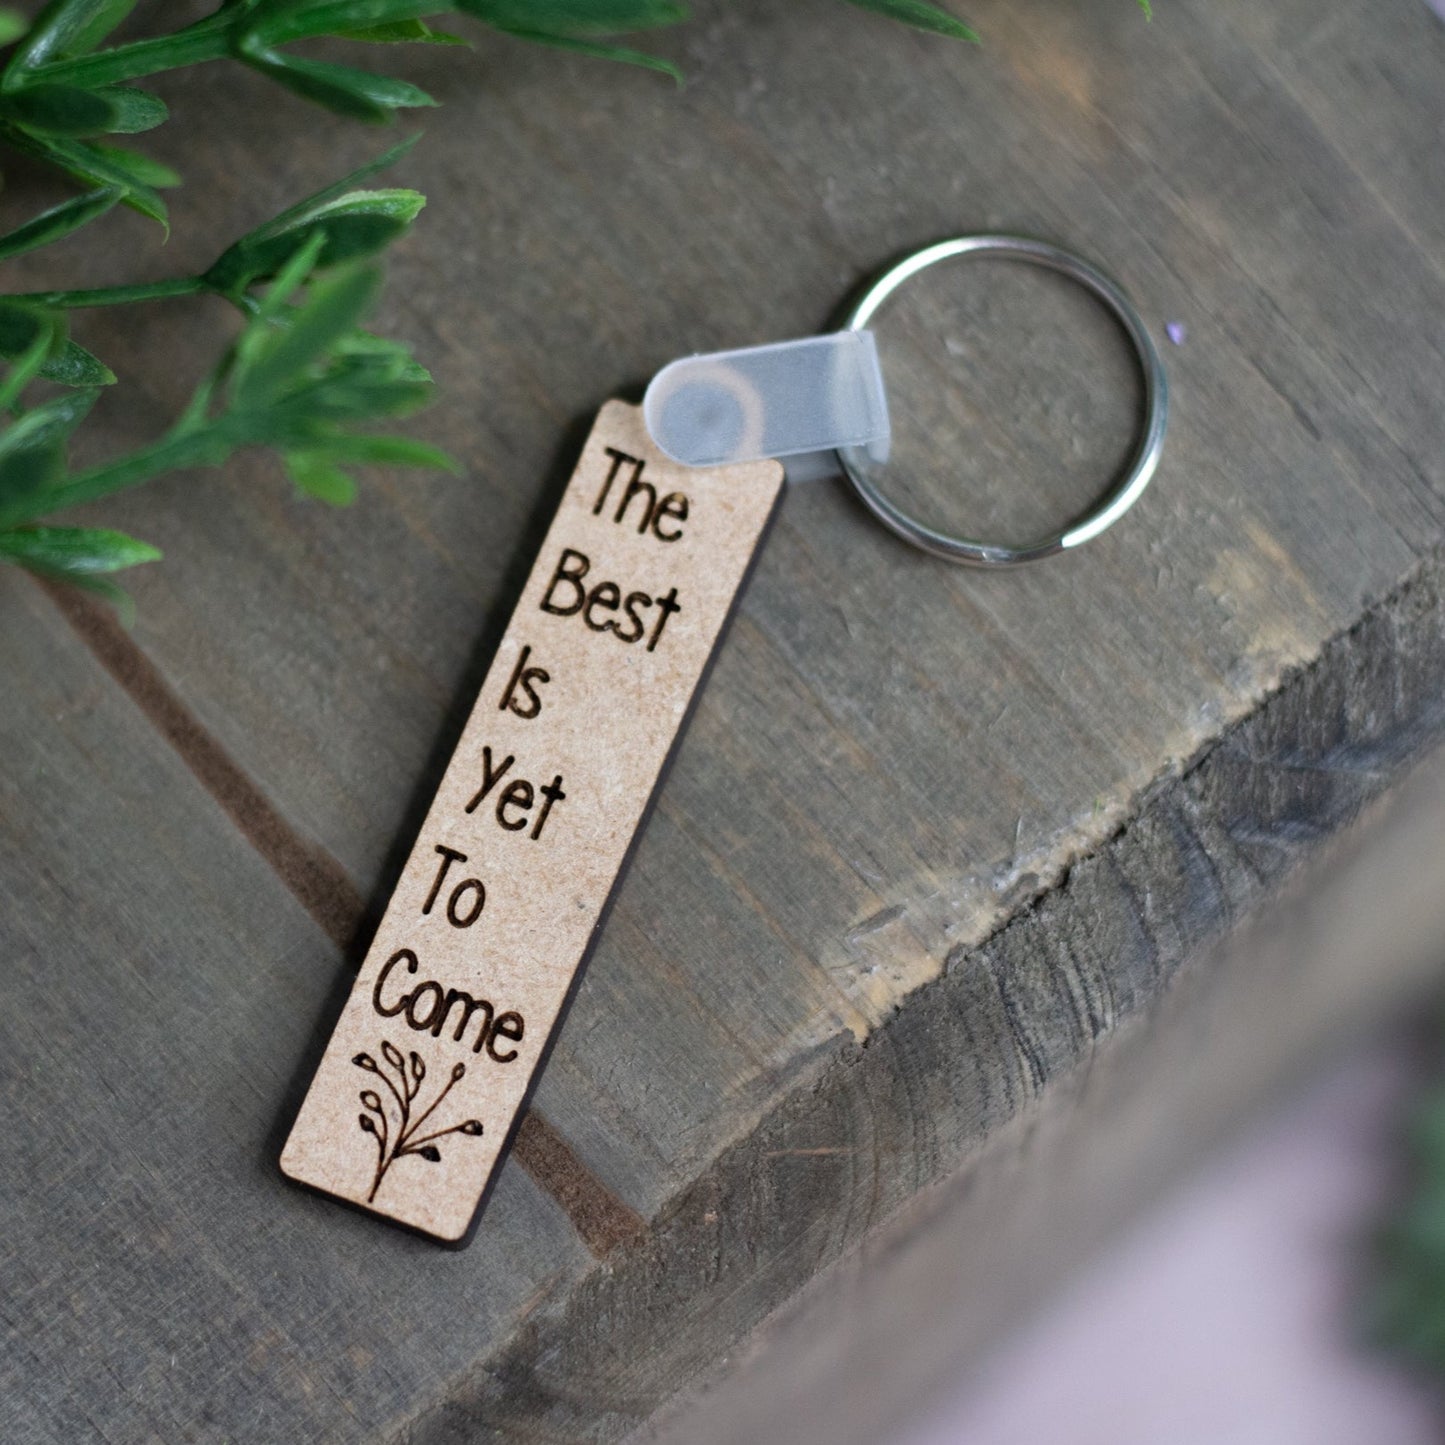 "The Best Is Yet To Come" Keychain